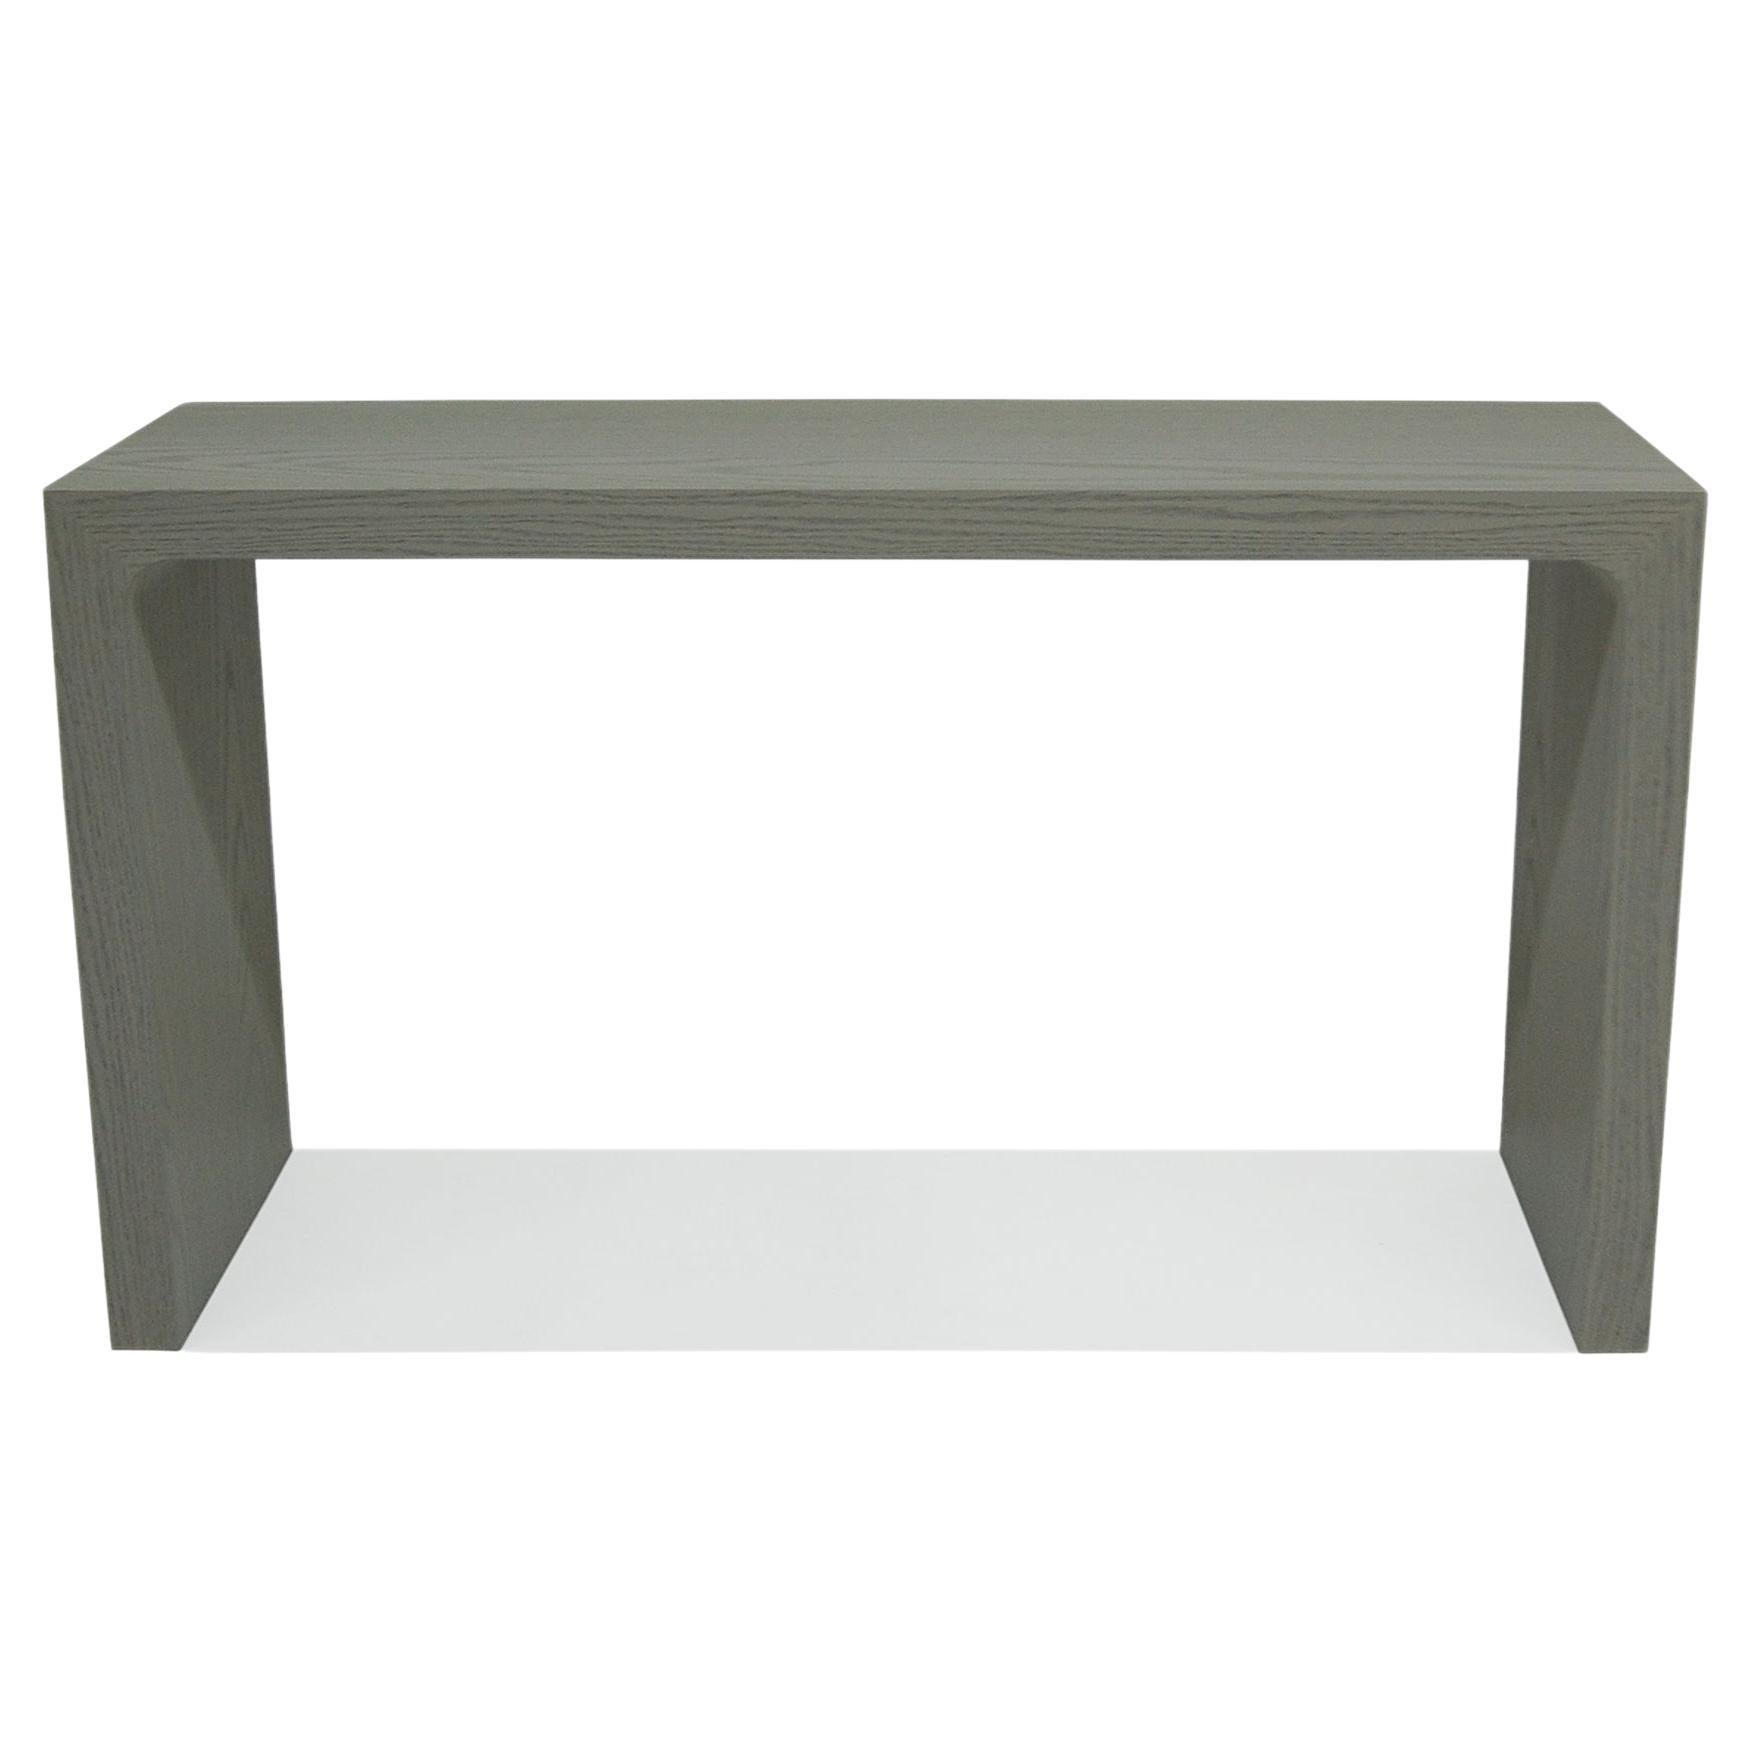 Soho Console - Wood, Oak, Waterfall, Walnut, Maple, Entry Console, Grey, Rounded For Sale